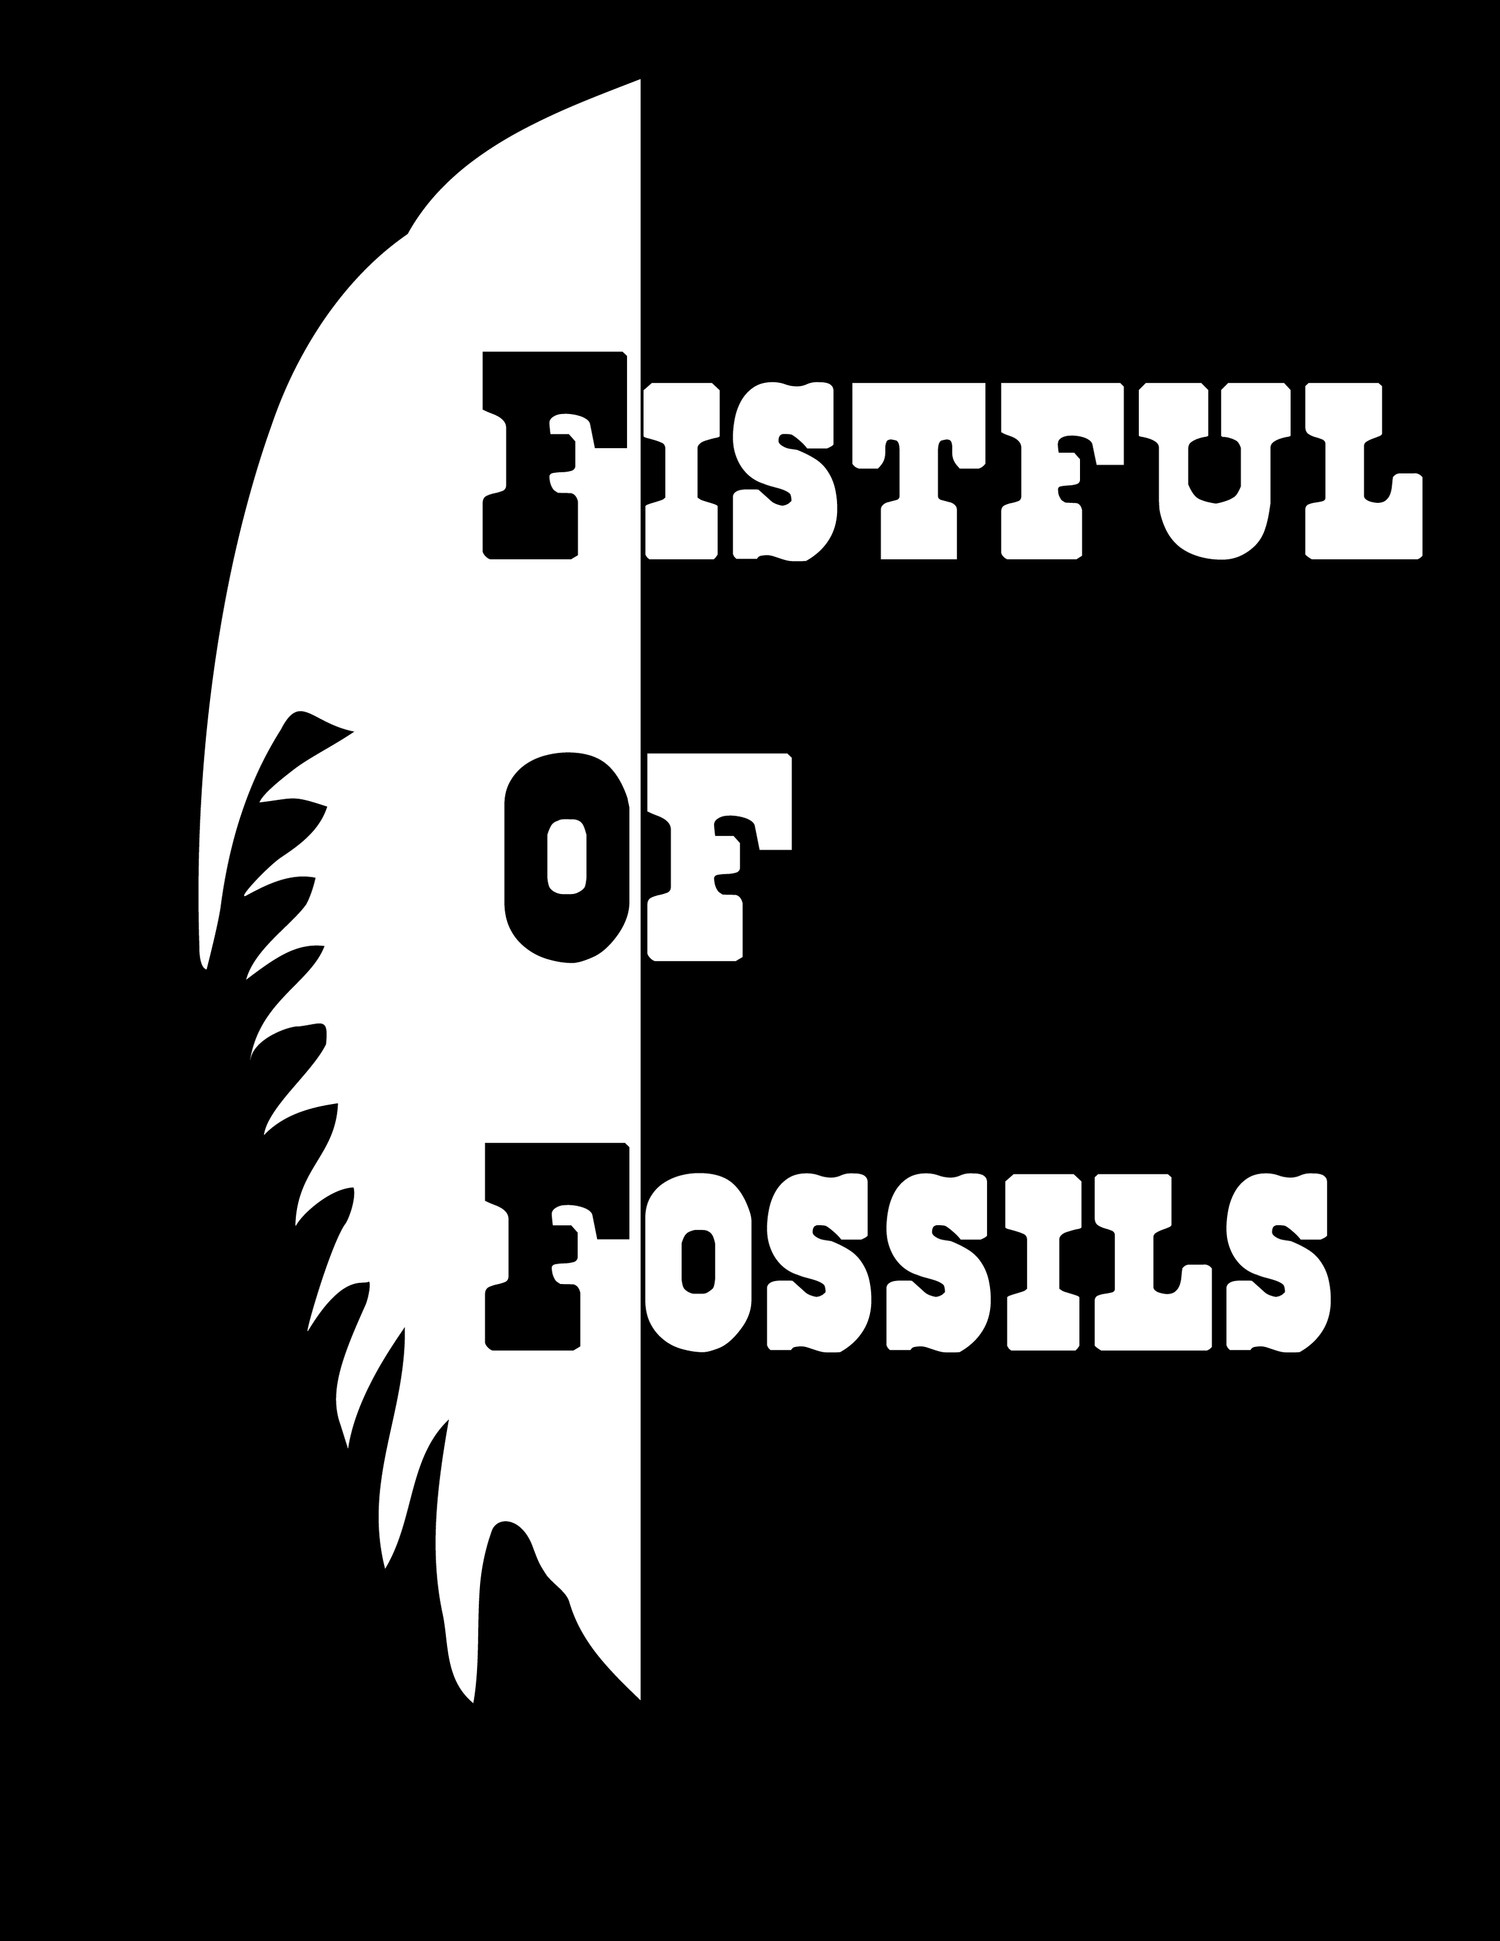 Fistful of Fossils